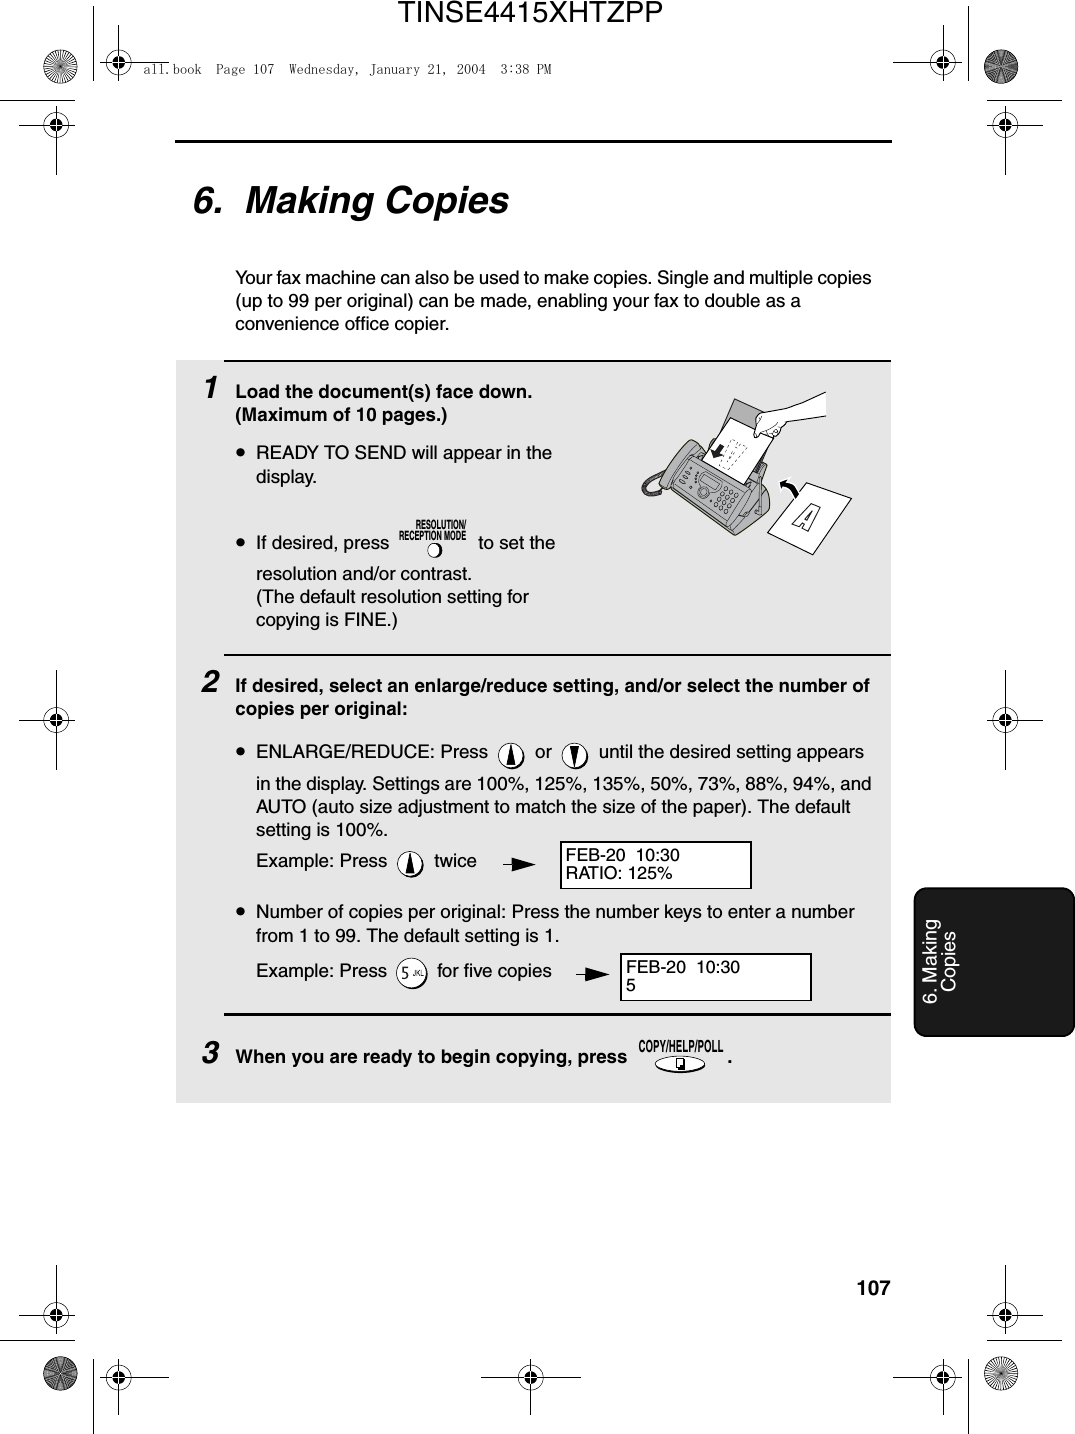 1076. MakingCopies6.  Making CopiesYour fax machine can also be used to make copies. Single and multiple copies (up to 99 per original) can be made, enabling your fax to double as a convenience office copier. 1Load the document(s) face down. (Maximum of 10 pages.)•READY TO SEND will appear in the display.•If desired, press   to set the resolution and/or contrast. (The default resolution setting for copying is FINE.)2If desired, select an enlarge/reduce setting, and/or select the number of copies per original:•ENLARGE/REDUCE: Press   or   until the desired setting appears in the display. Settings are 100%, 125%, 135%, 50%, 73%, 88%, 94%, and AUTO (auto size adjustment to match the size of the paper). The default setting is 100%.Example: Press   twice•Number of copies per original: Press the number keys to enter a number from 1 to 99. The default setting is 1.Example: Press   for five copies3When you are ready to begin copying, press  .RESOLUTION/RECEPTION MODECOPY/HELP/POLLFEB-20  10:30RATIO: 125%FEB-20  10:305all.book  Page 107  Wednesday, January 21, 2004  3:38 PMTINSE4415XHTZPP